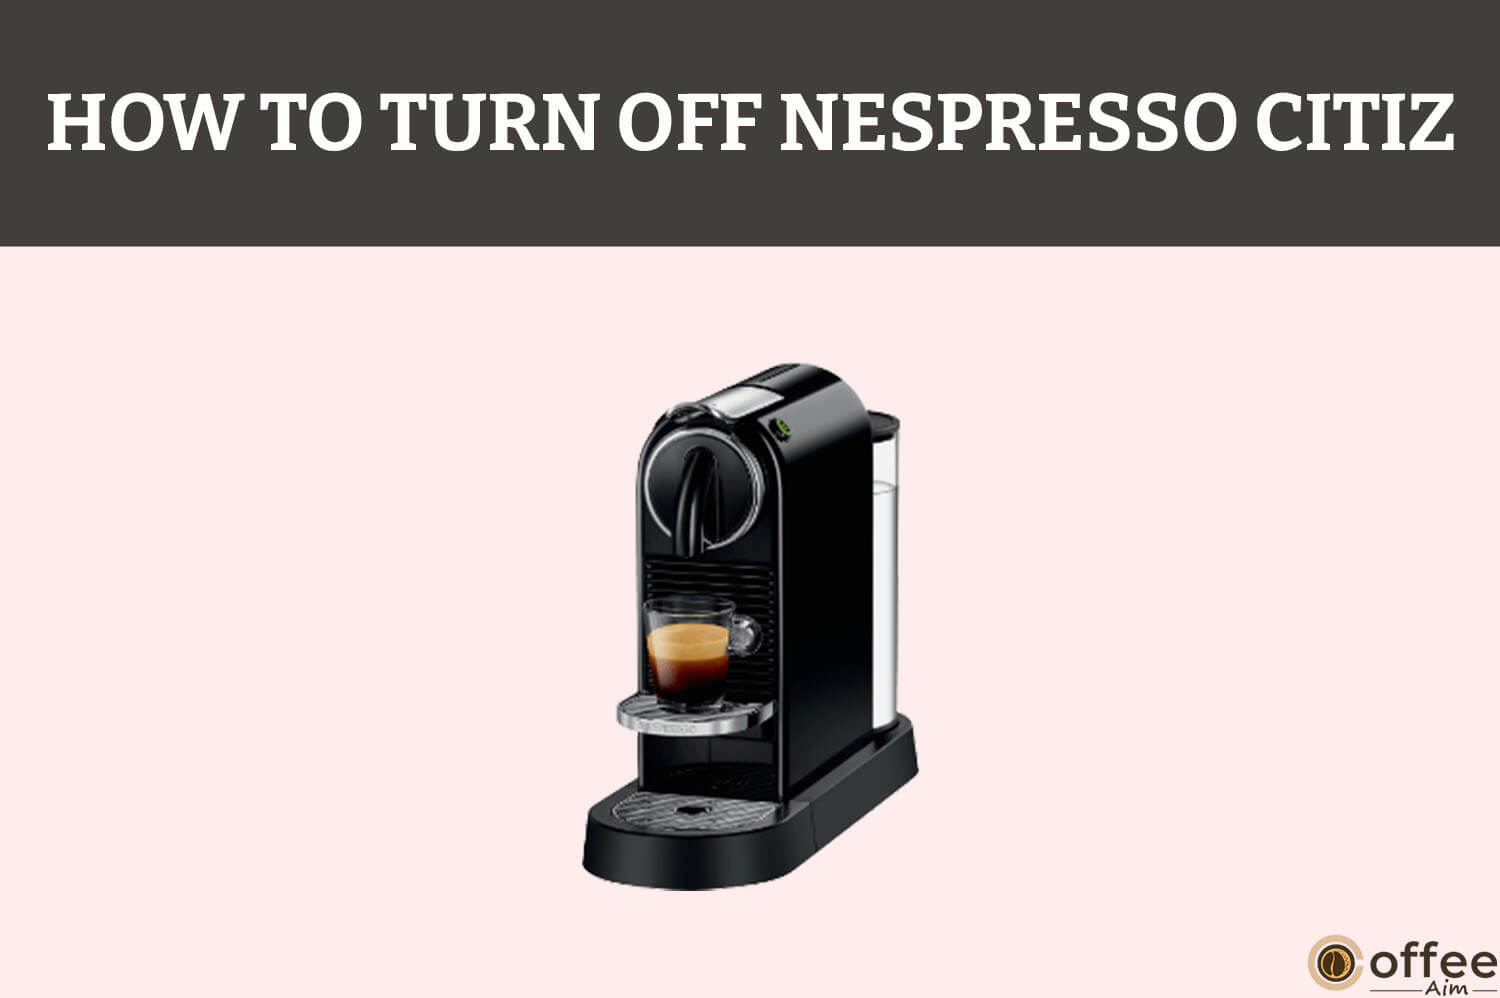 Featured image for the article "How To Turn Off Nespresso Citiz"